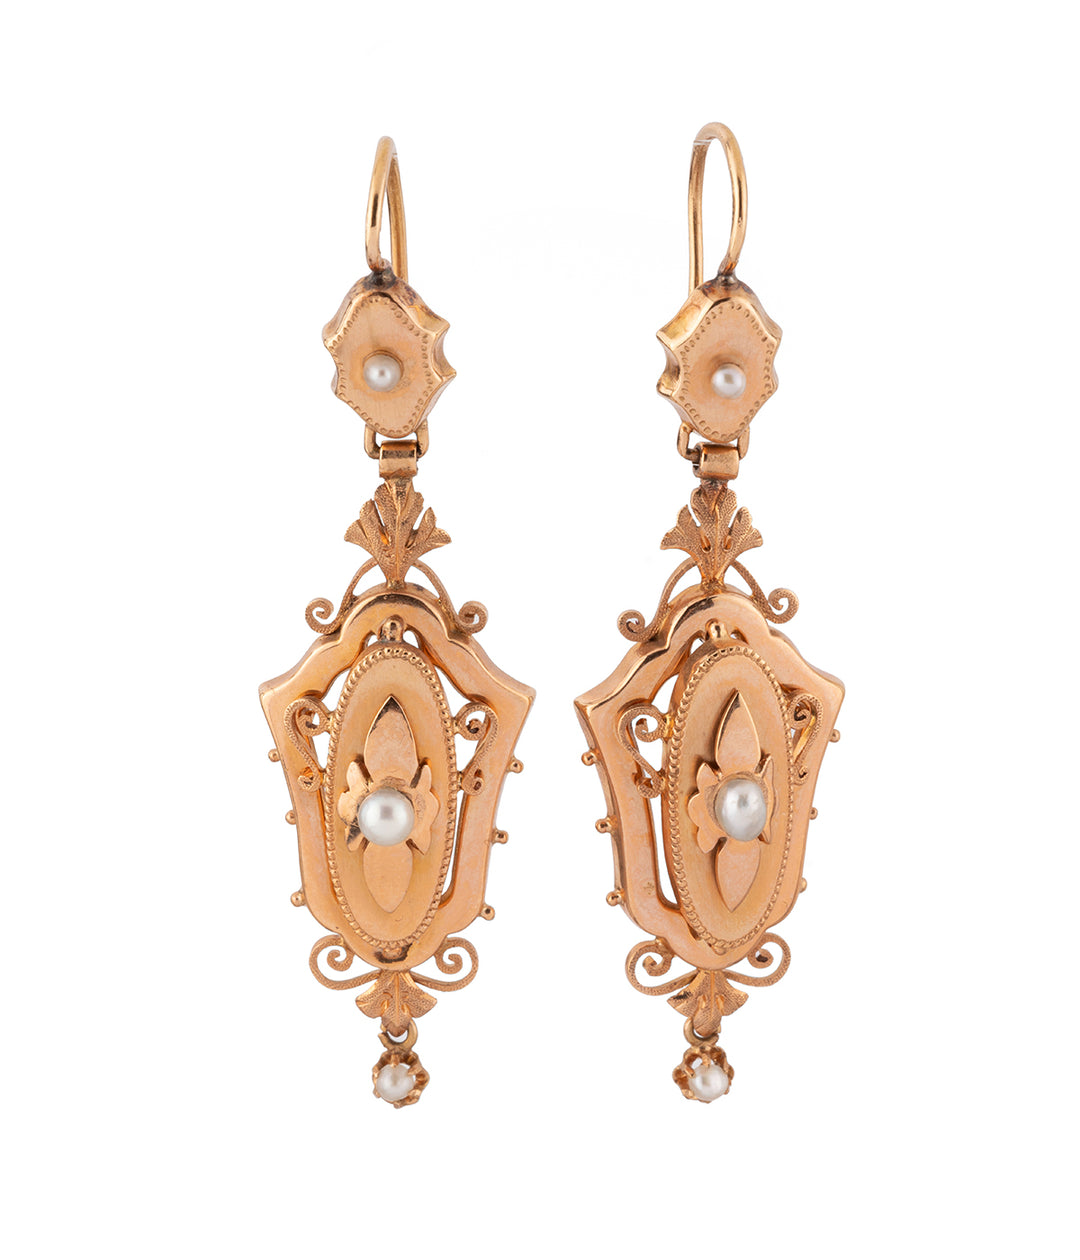 antique earrings gold and pearls "Ebba" - Caillou Paris